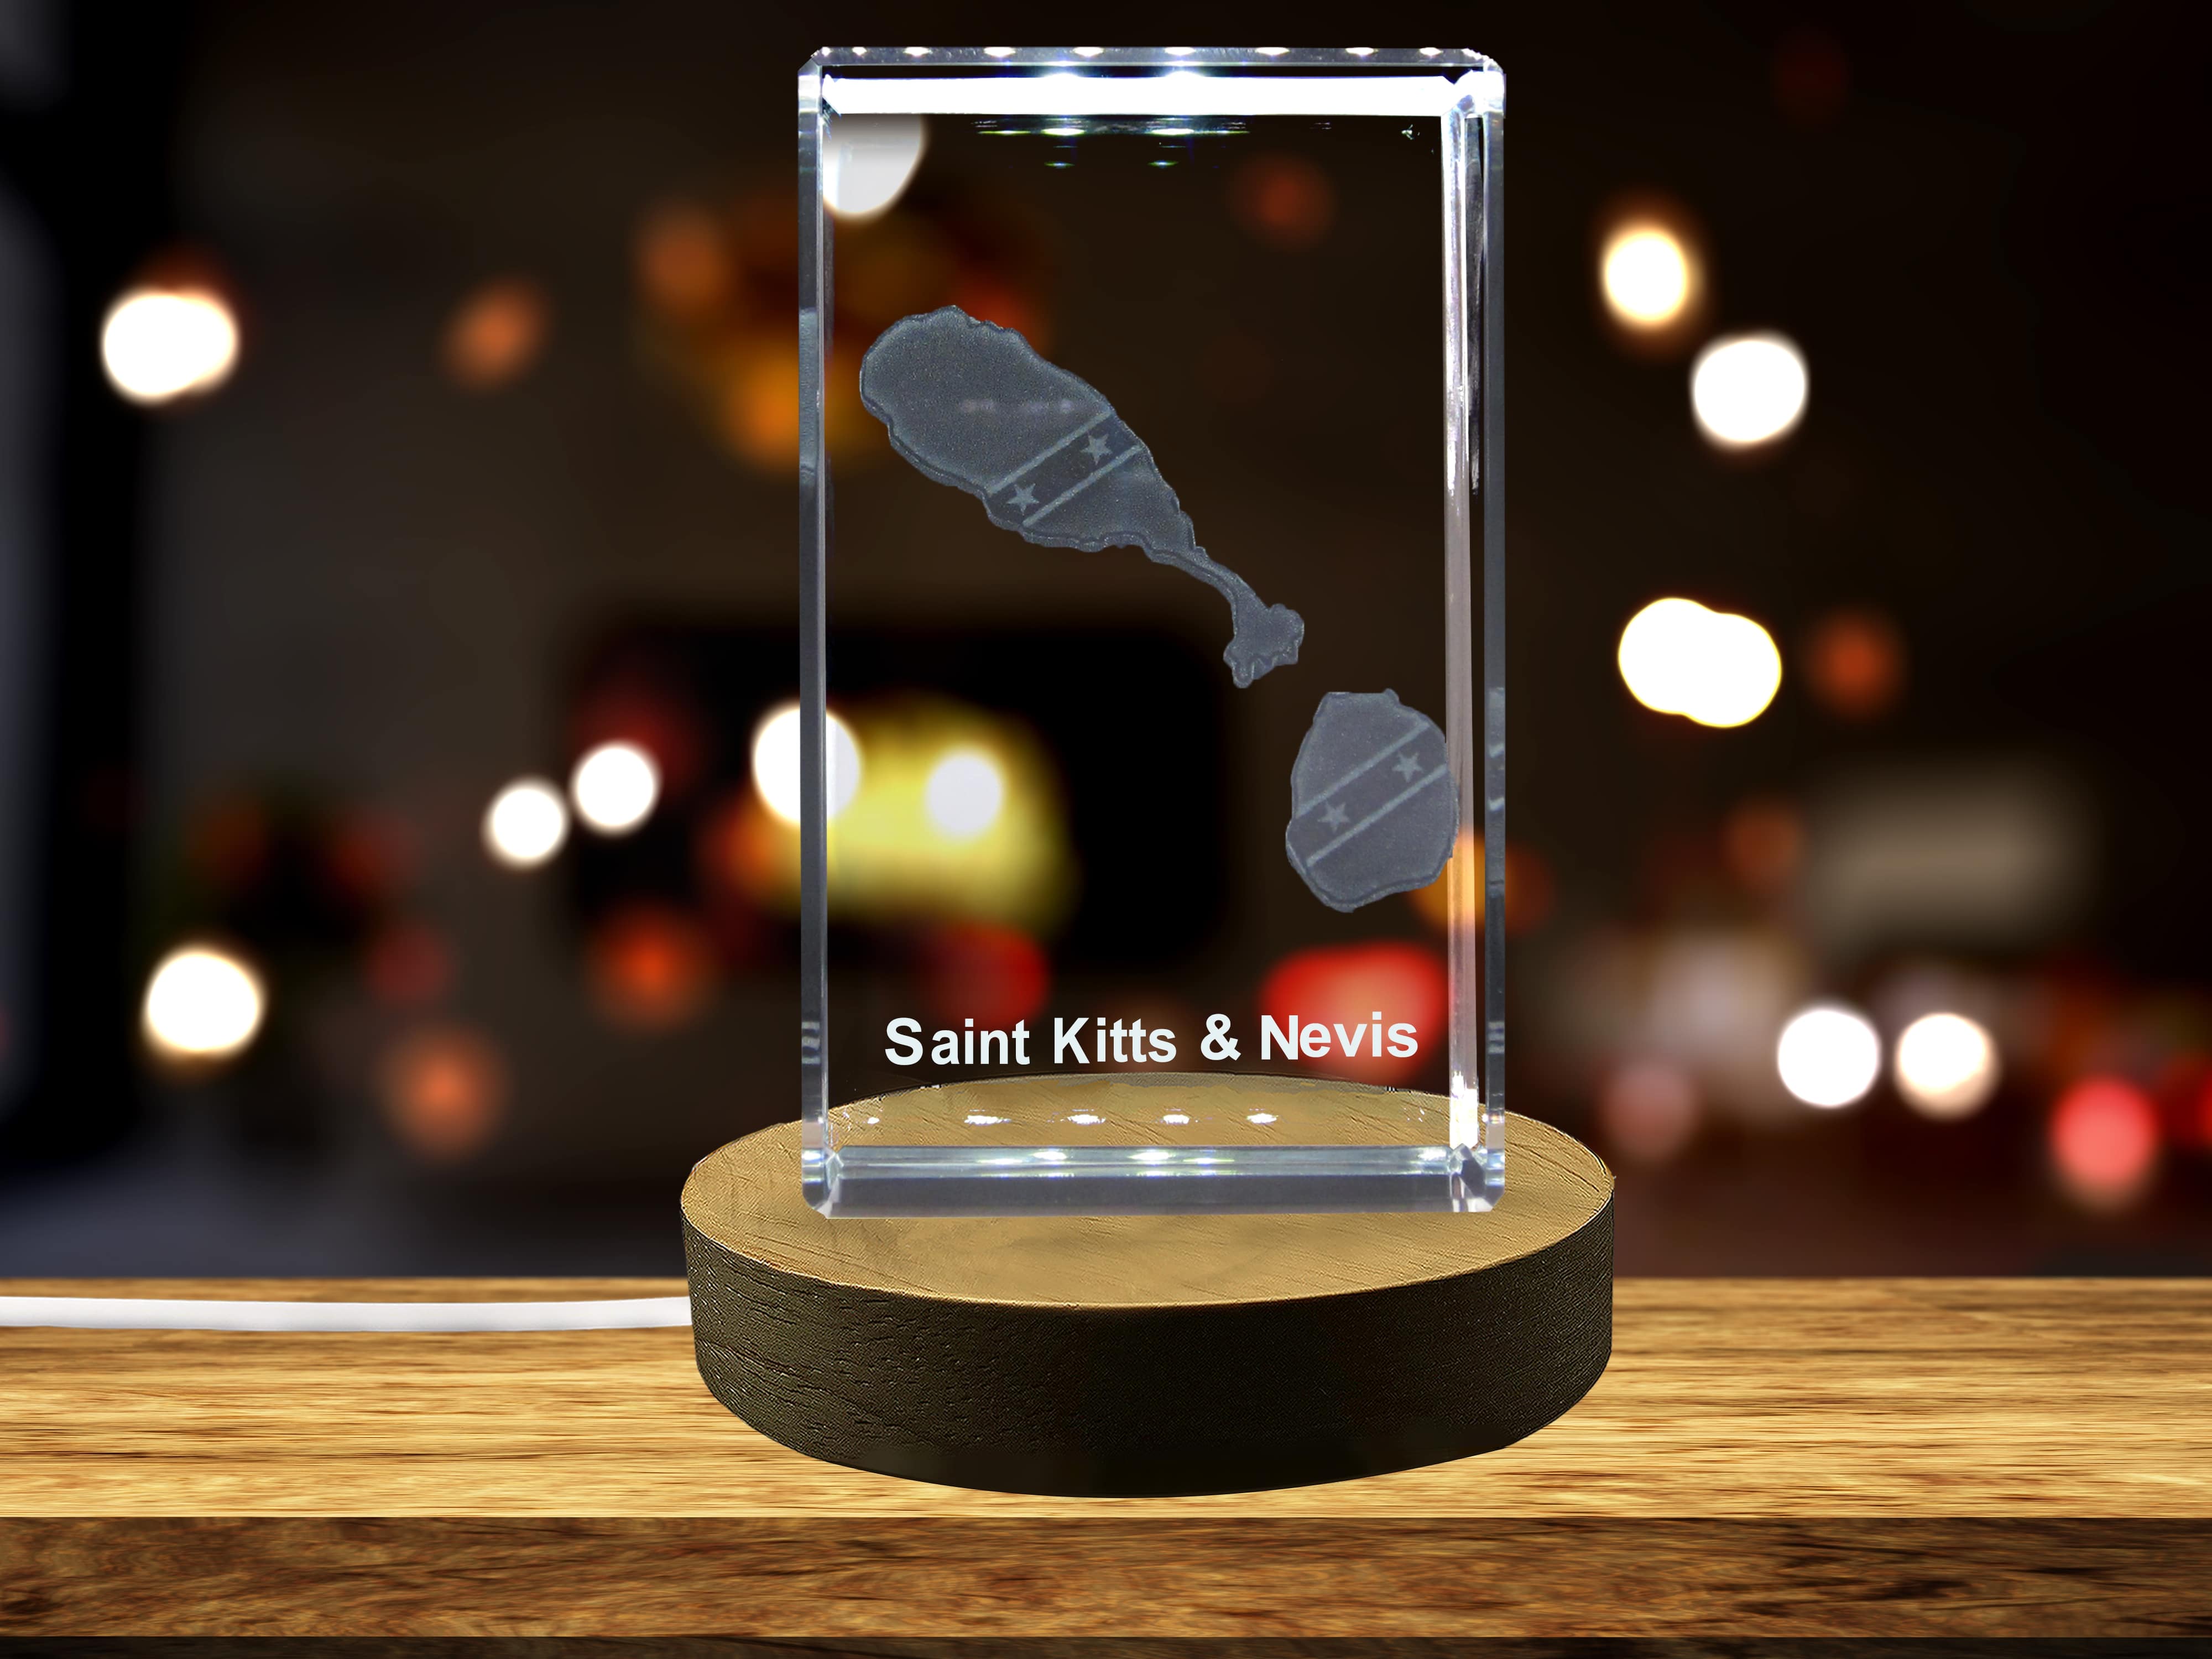 St Kitts & Nevis 3D Engraved Crystal 3D Engraved Crystal Keepsake/Gift/Decor/Collectible/Souvenir A&B Crystal Collection